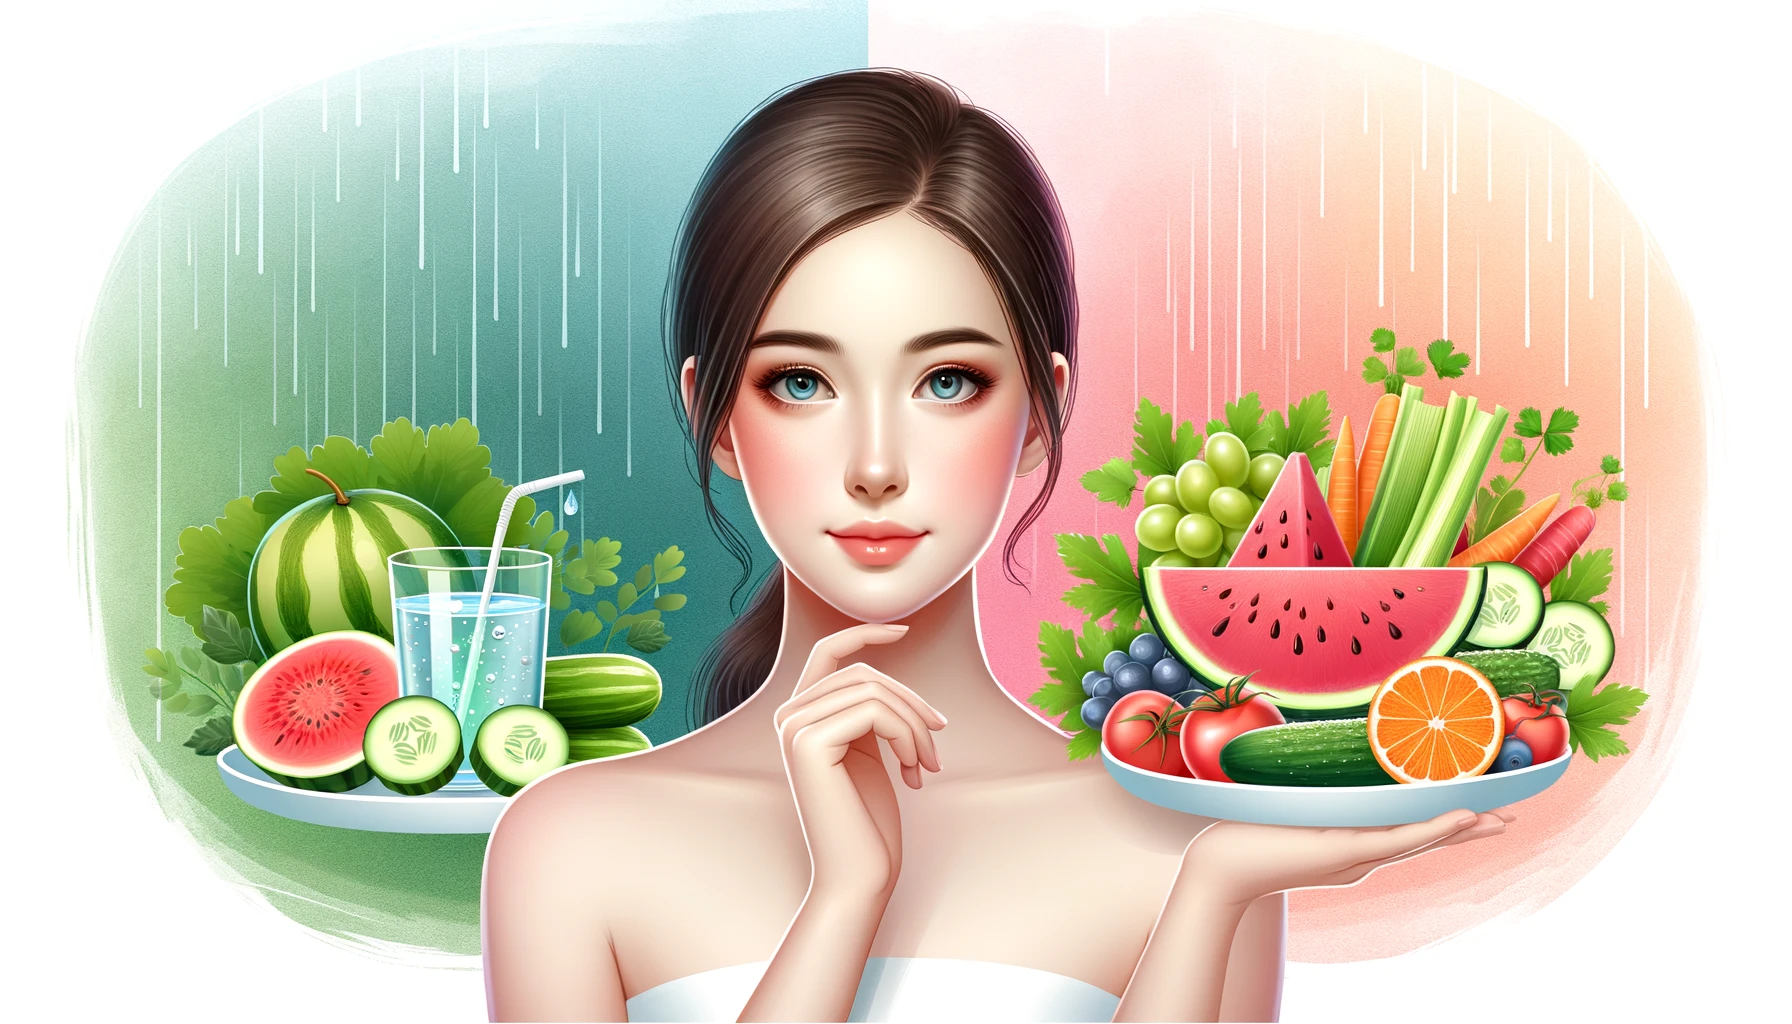 Colorful spread of fruits, vegetables, and a glass of water highlighting the essence of natural beauty skincare.